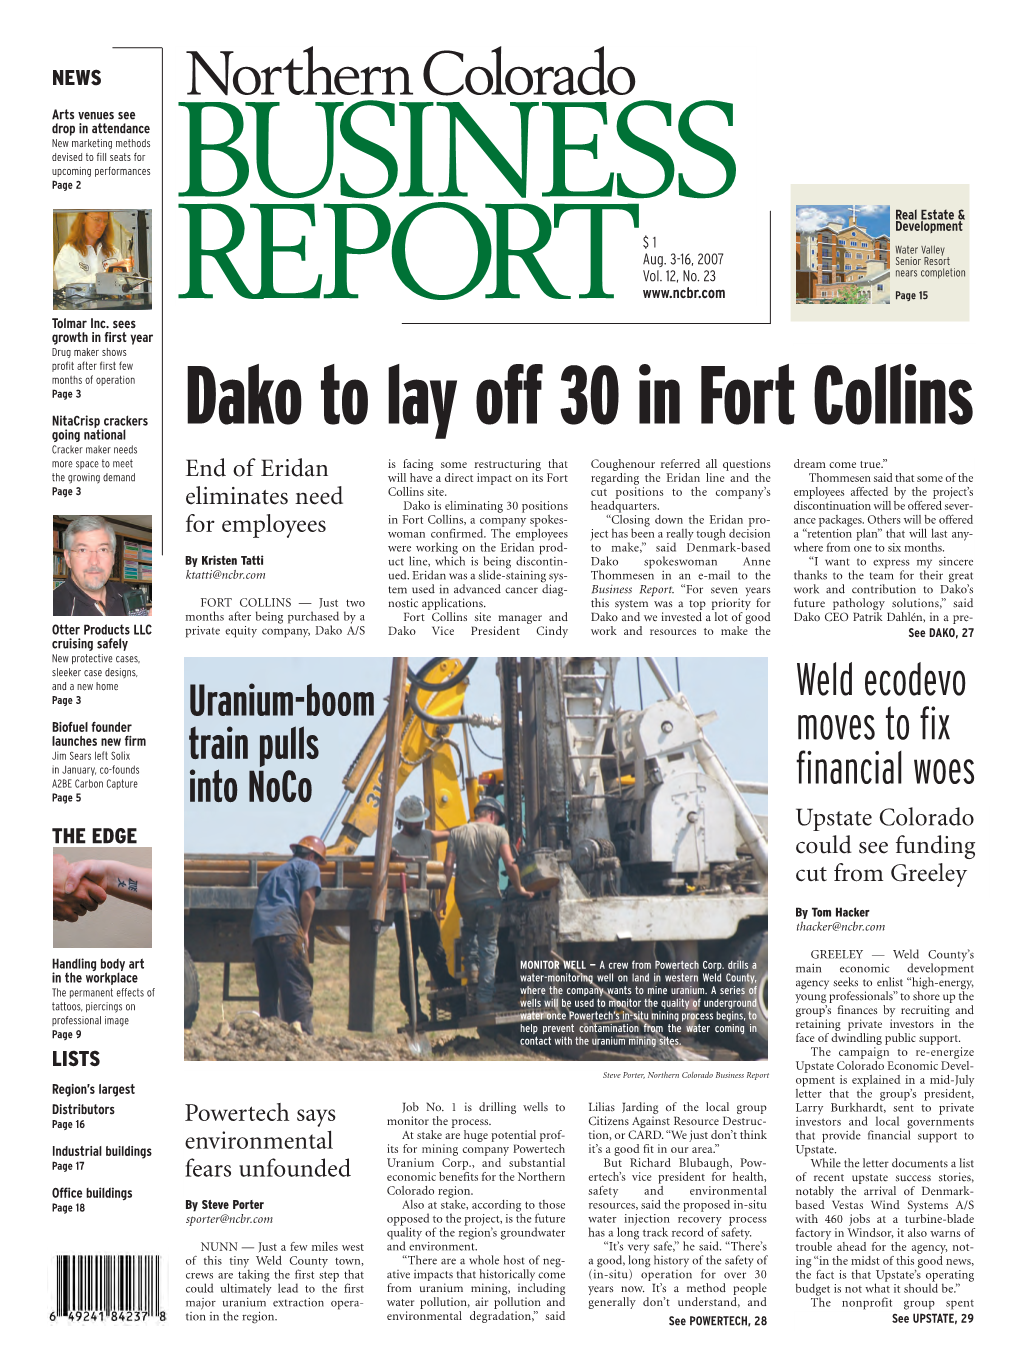 Dako to Lay Off 30 in Fort Collins